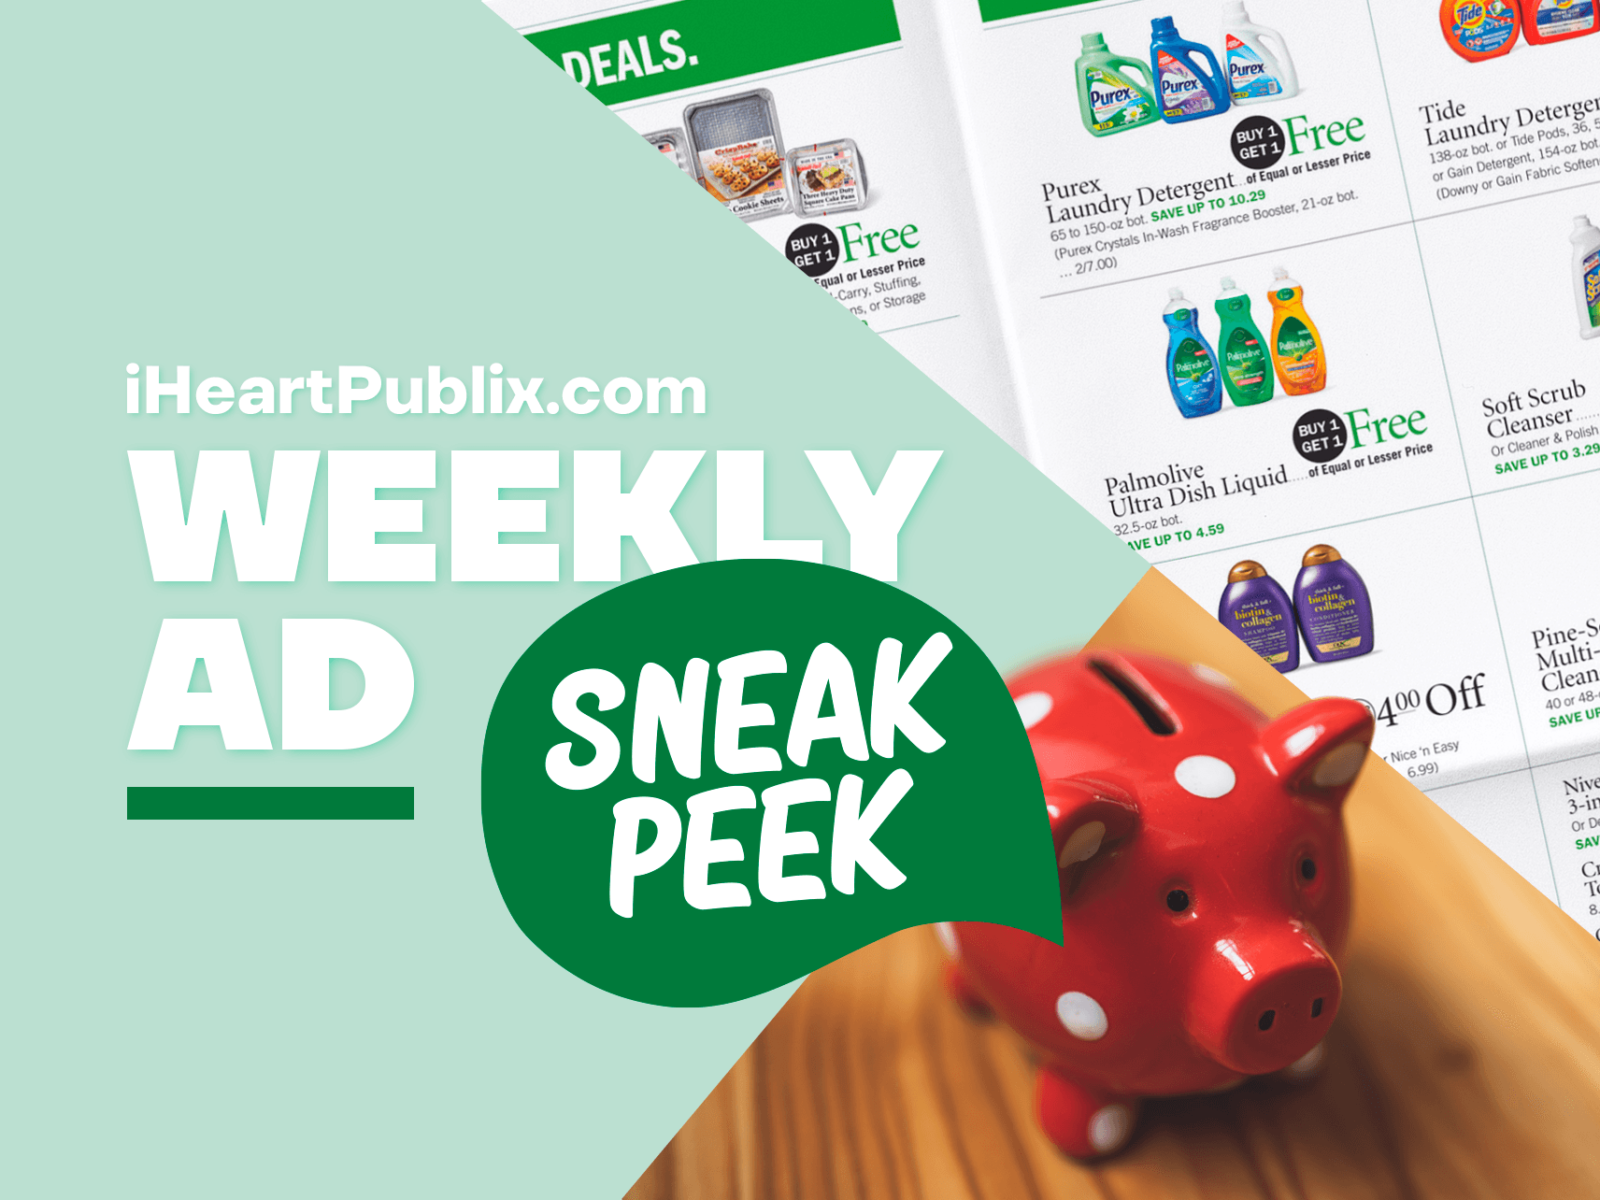 Publix Ad & Coupons Week Of 9/7 to 9/13 (9/6 to 9/12 For Some)